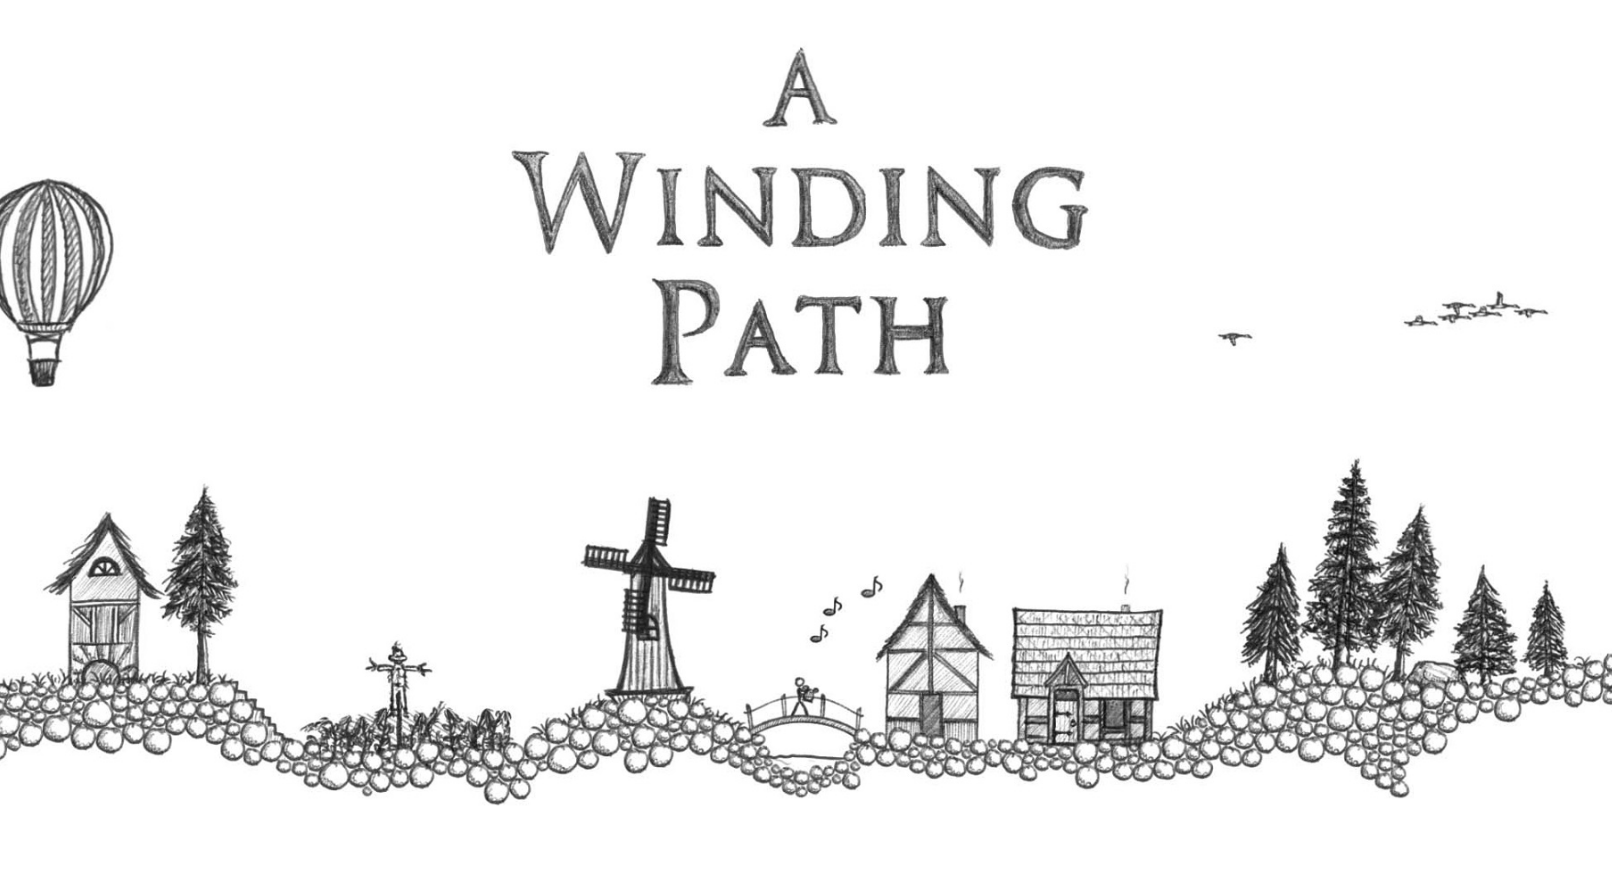 A winding path review